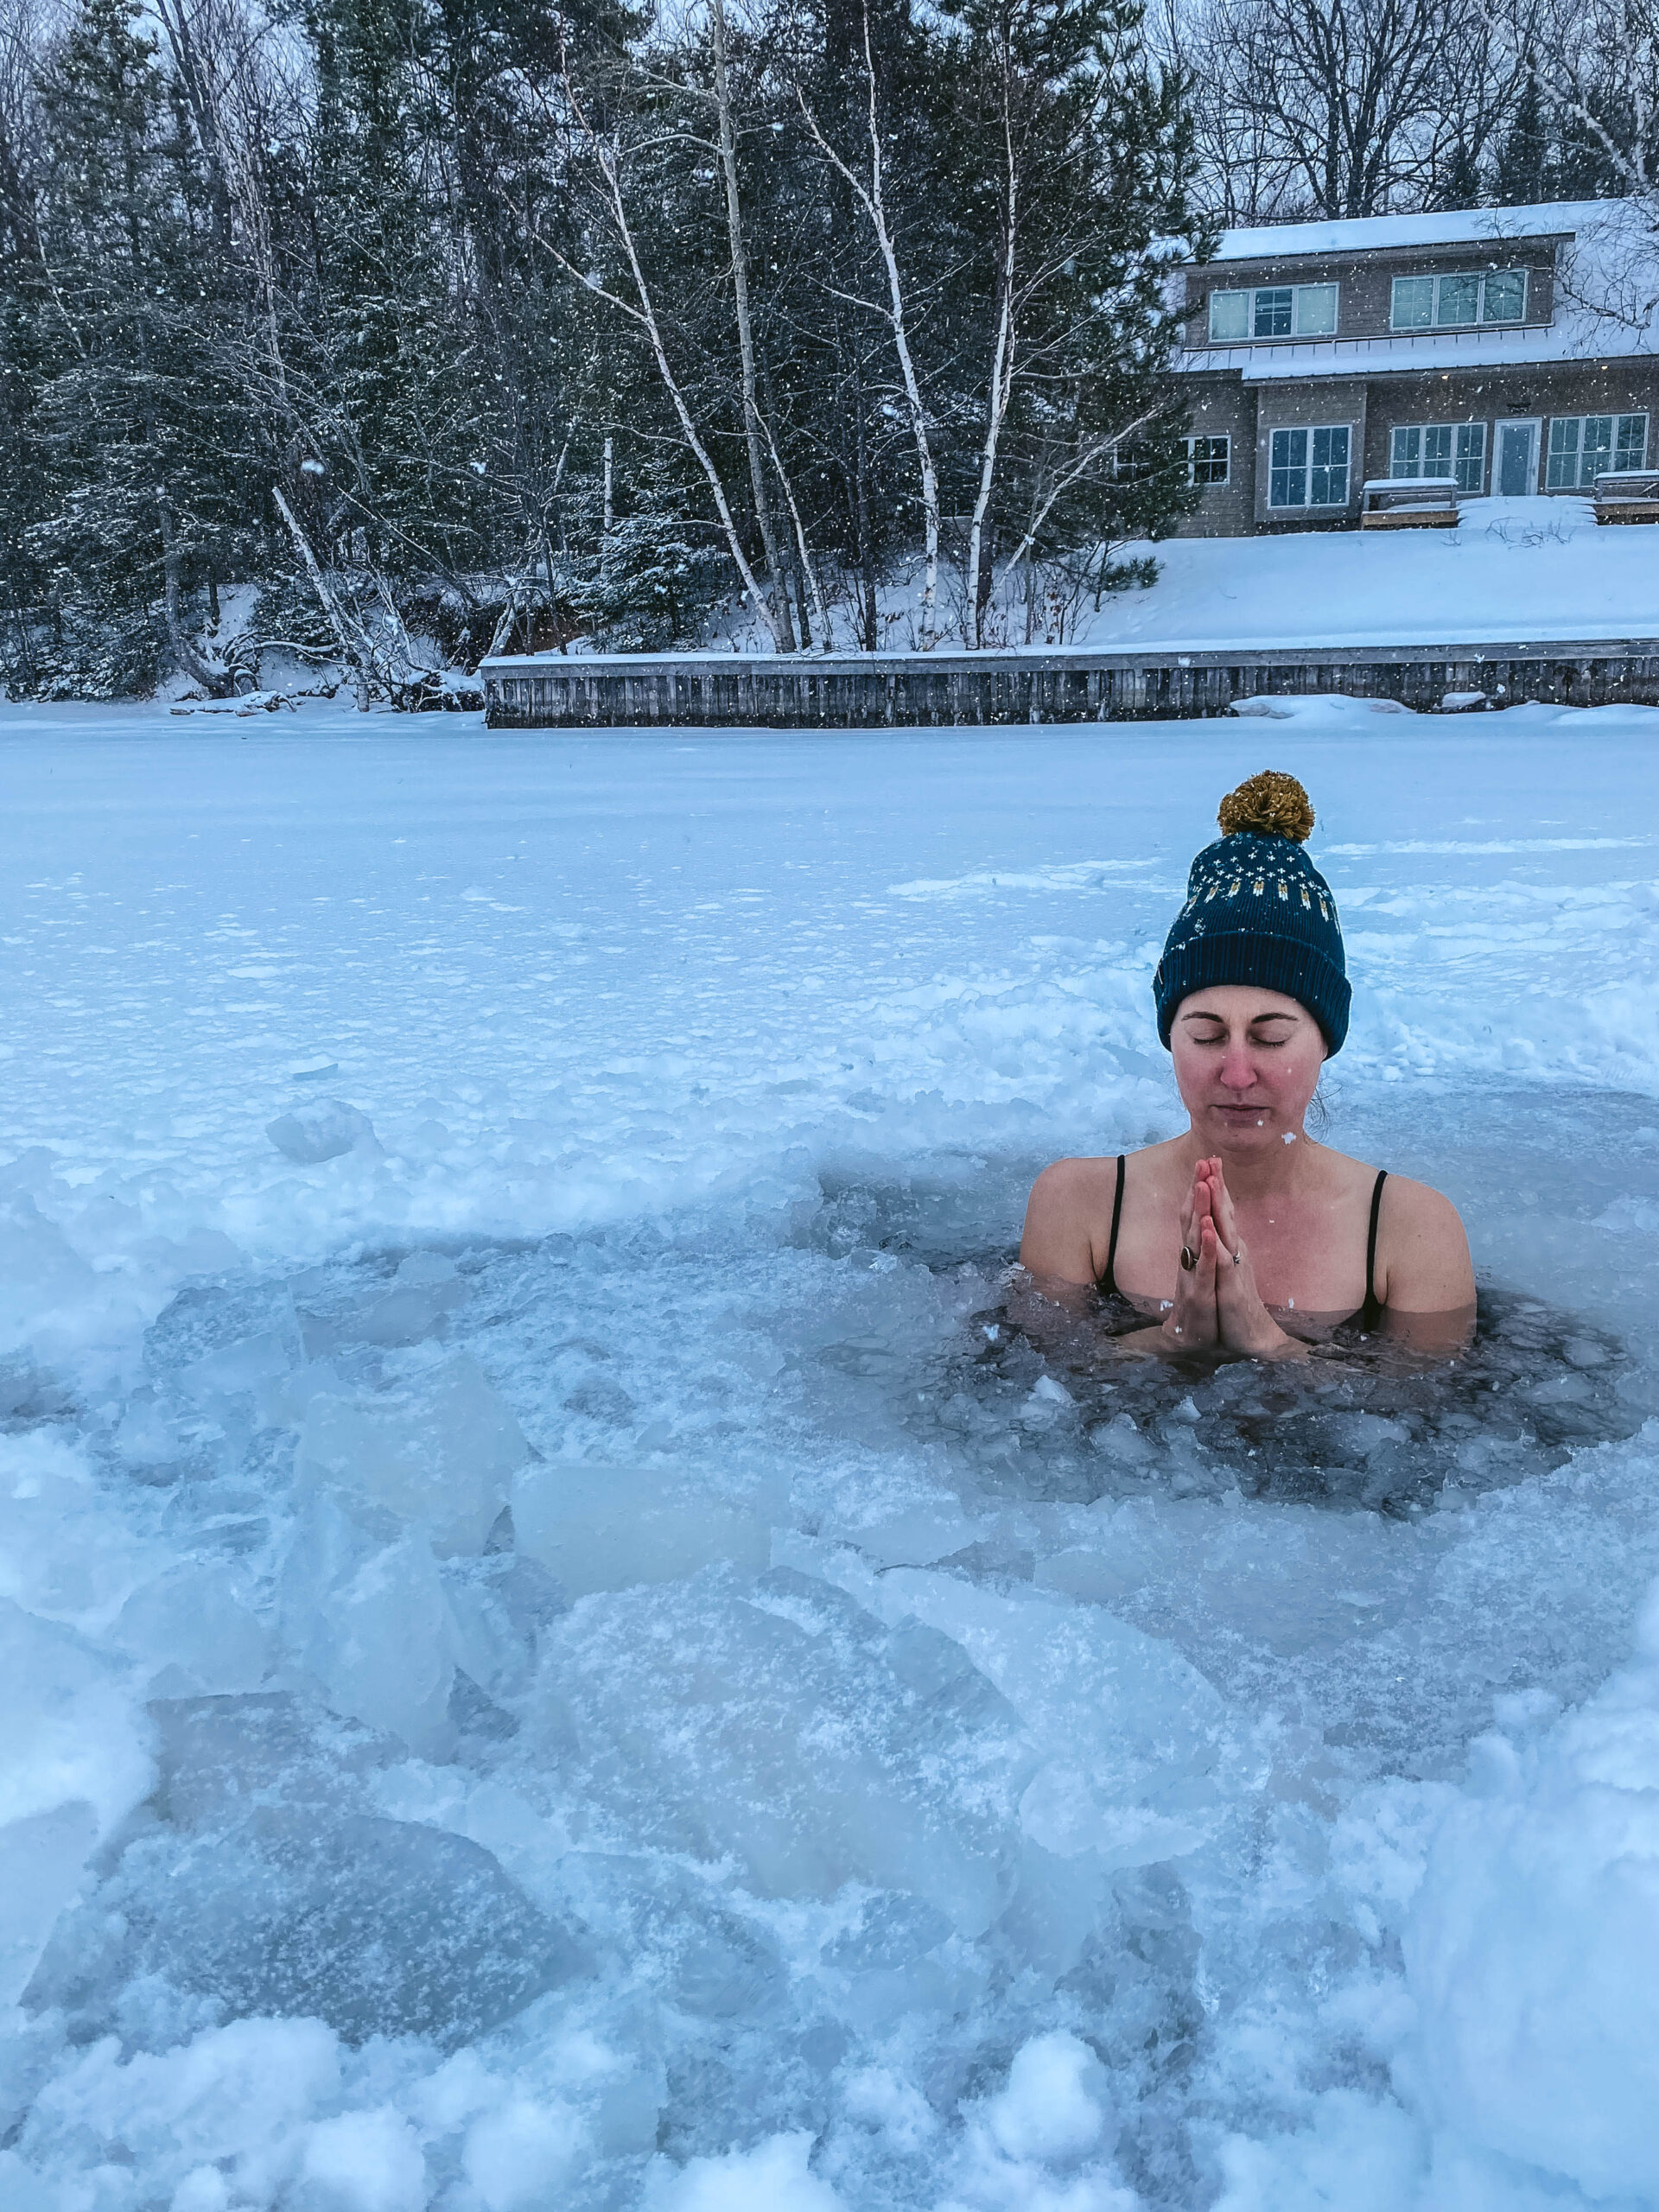 Should You Cold Plunge When Sick? Not Really.